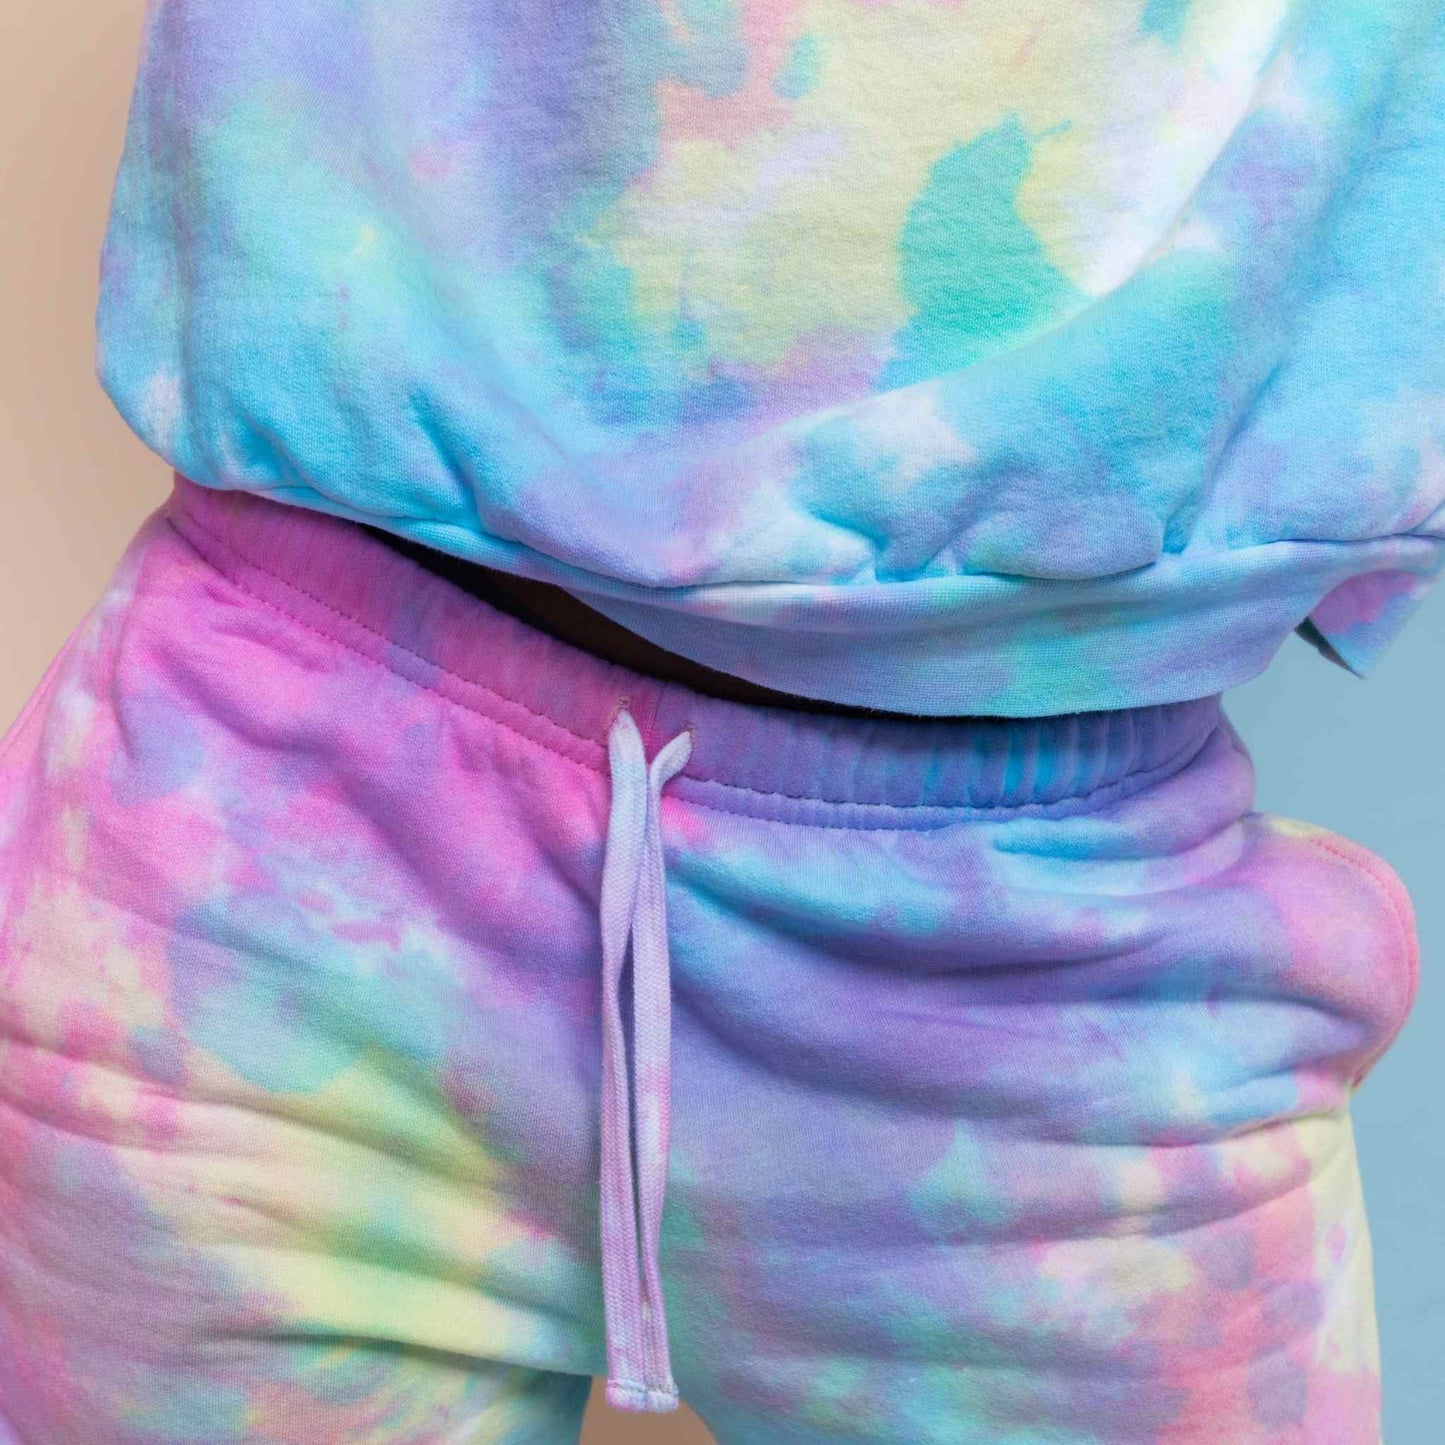 Pastel goth joggers tie dye watercolor effect pink blue and yellow